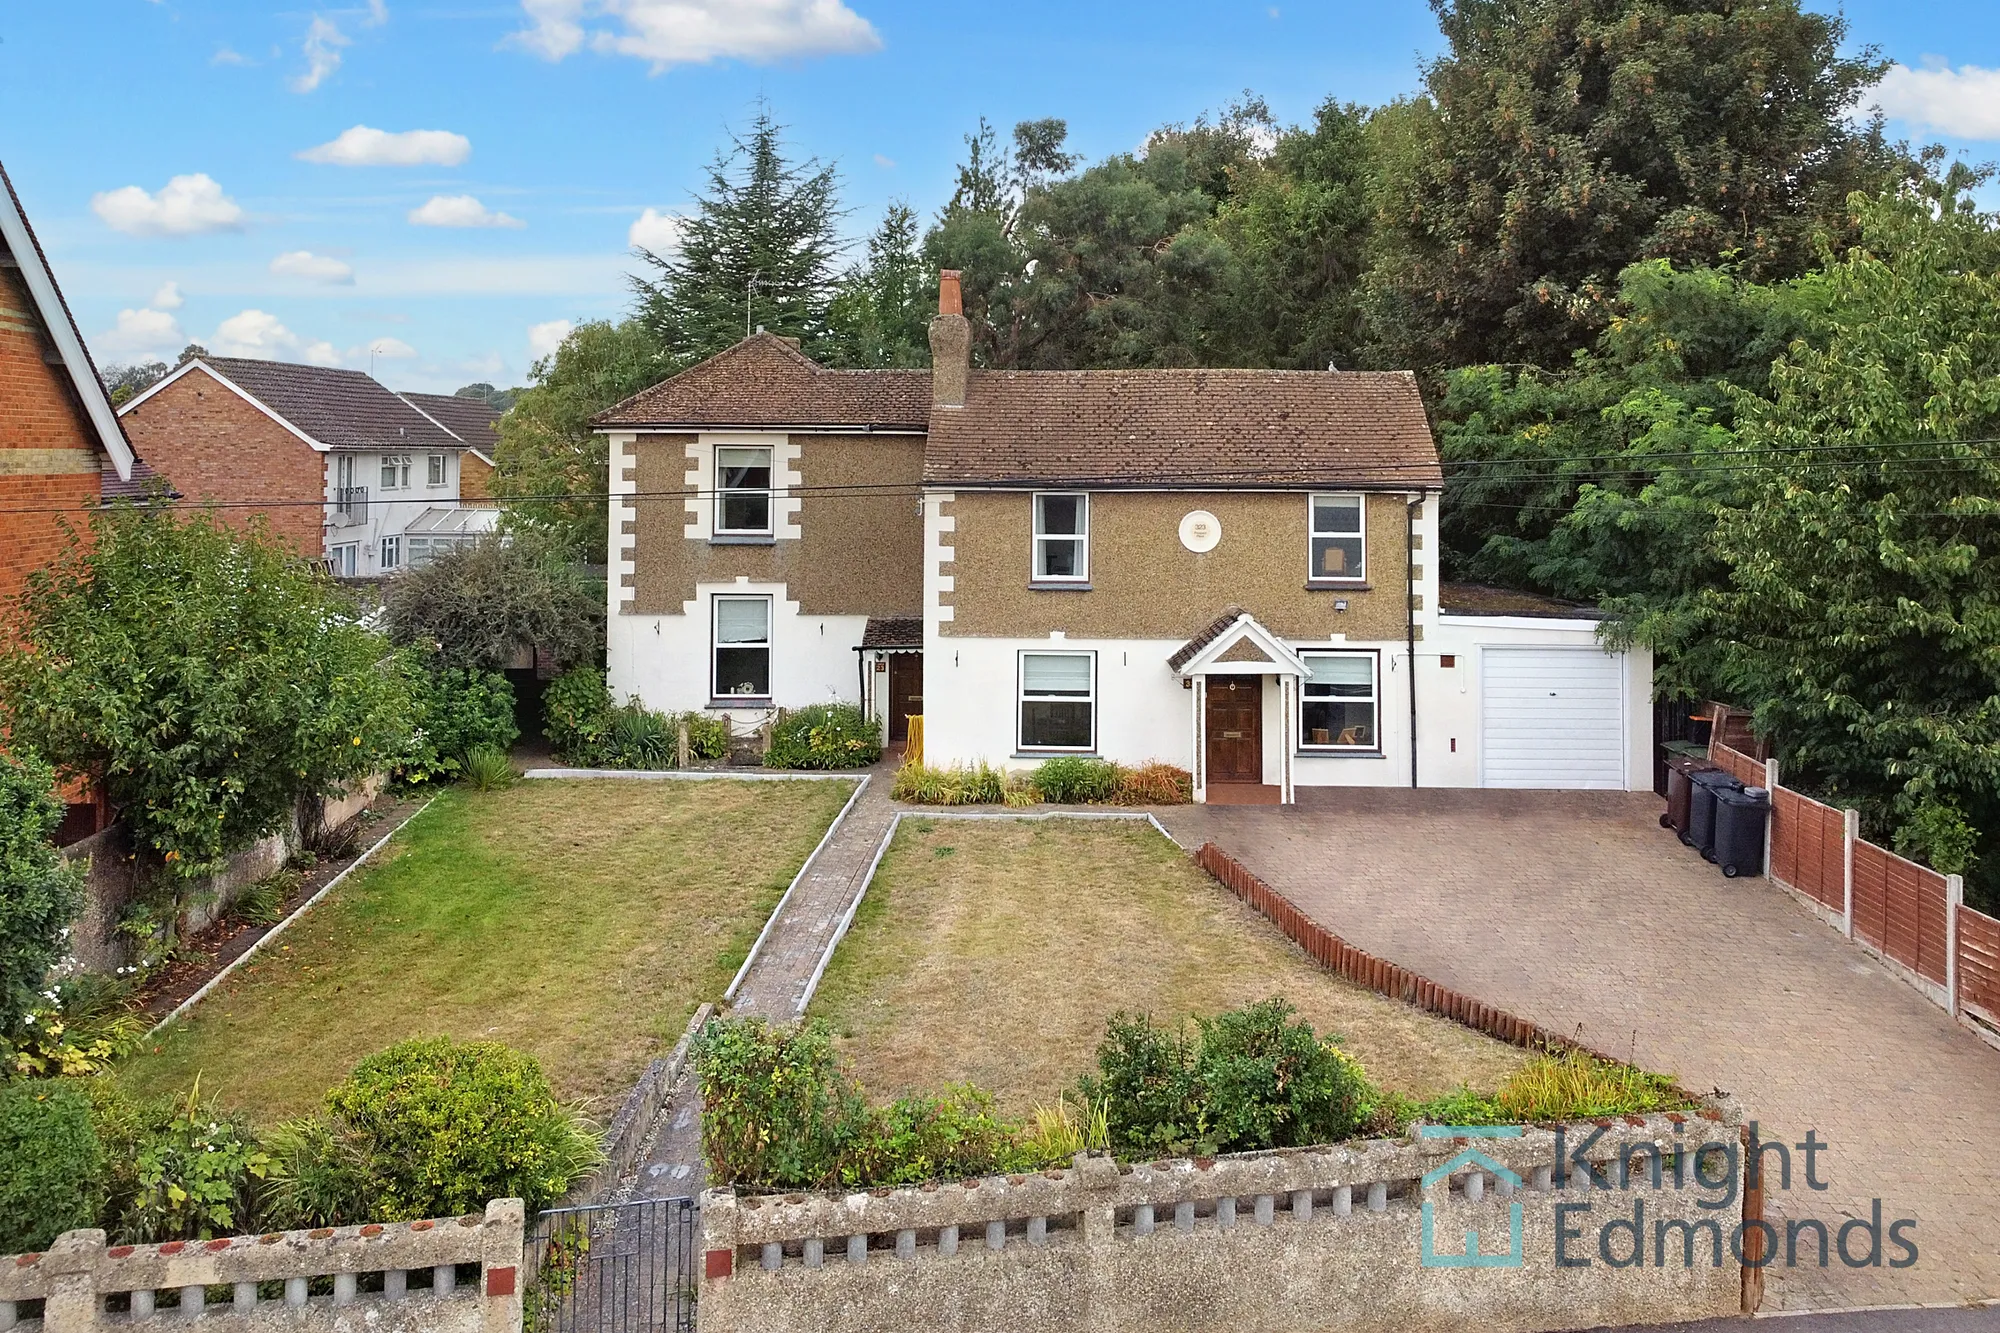 4 bed detached house for sale in Queens Road, Maidstone - Property Image 1